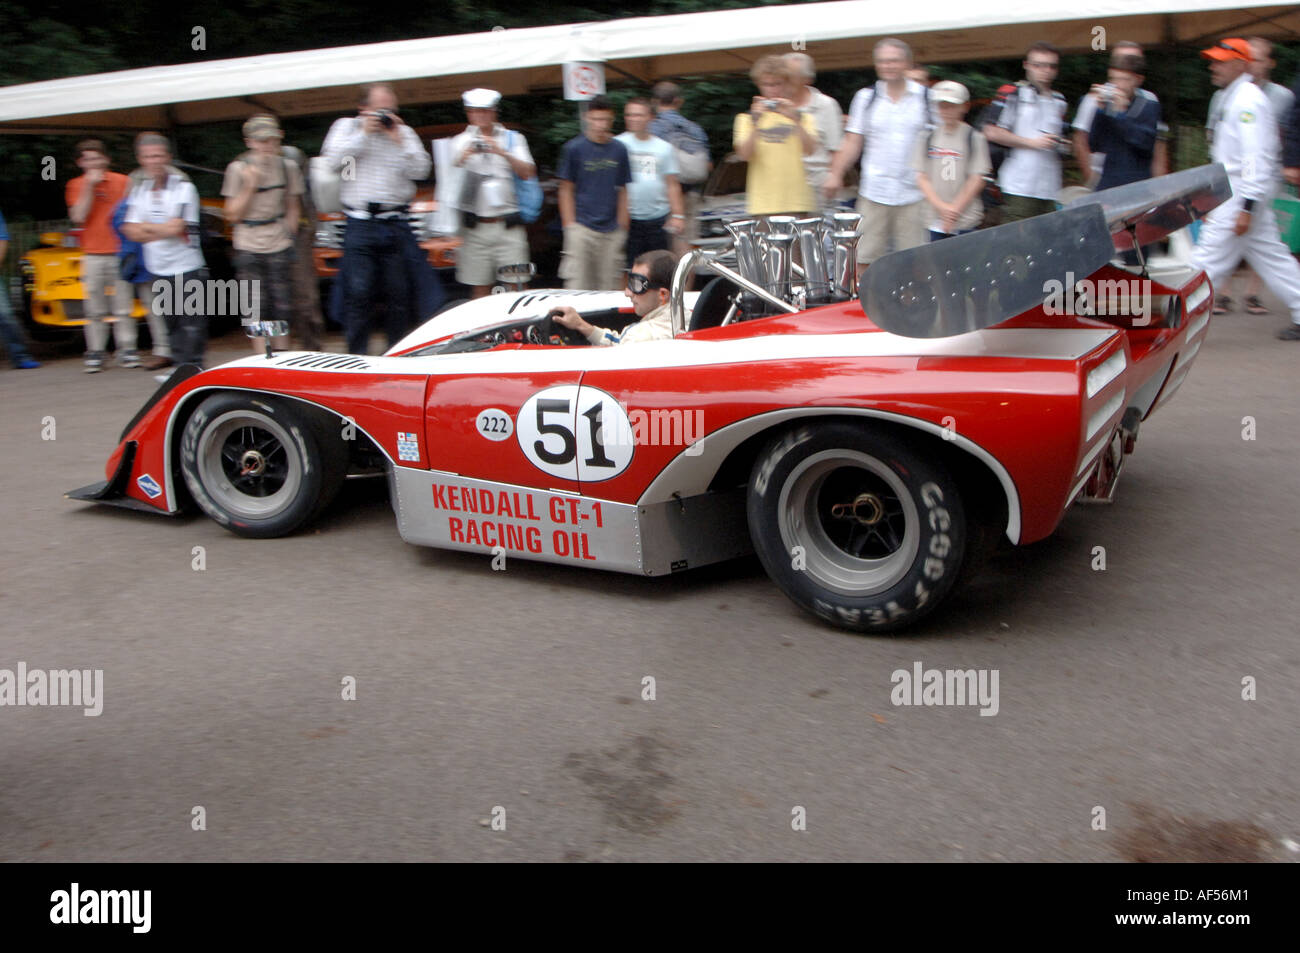 vintage Formula 1 car in the pits at Goodwood Festival of Speed. Ferrari Stock Photo